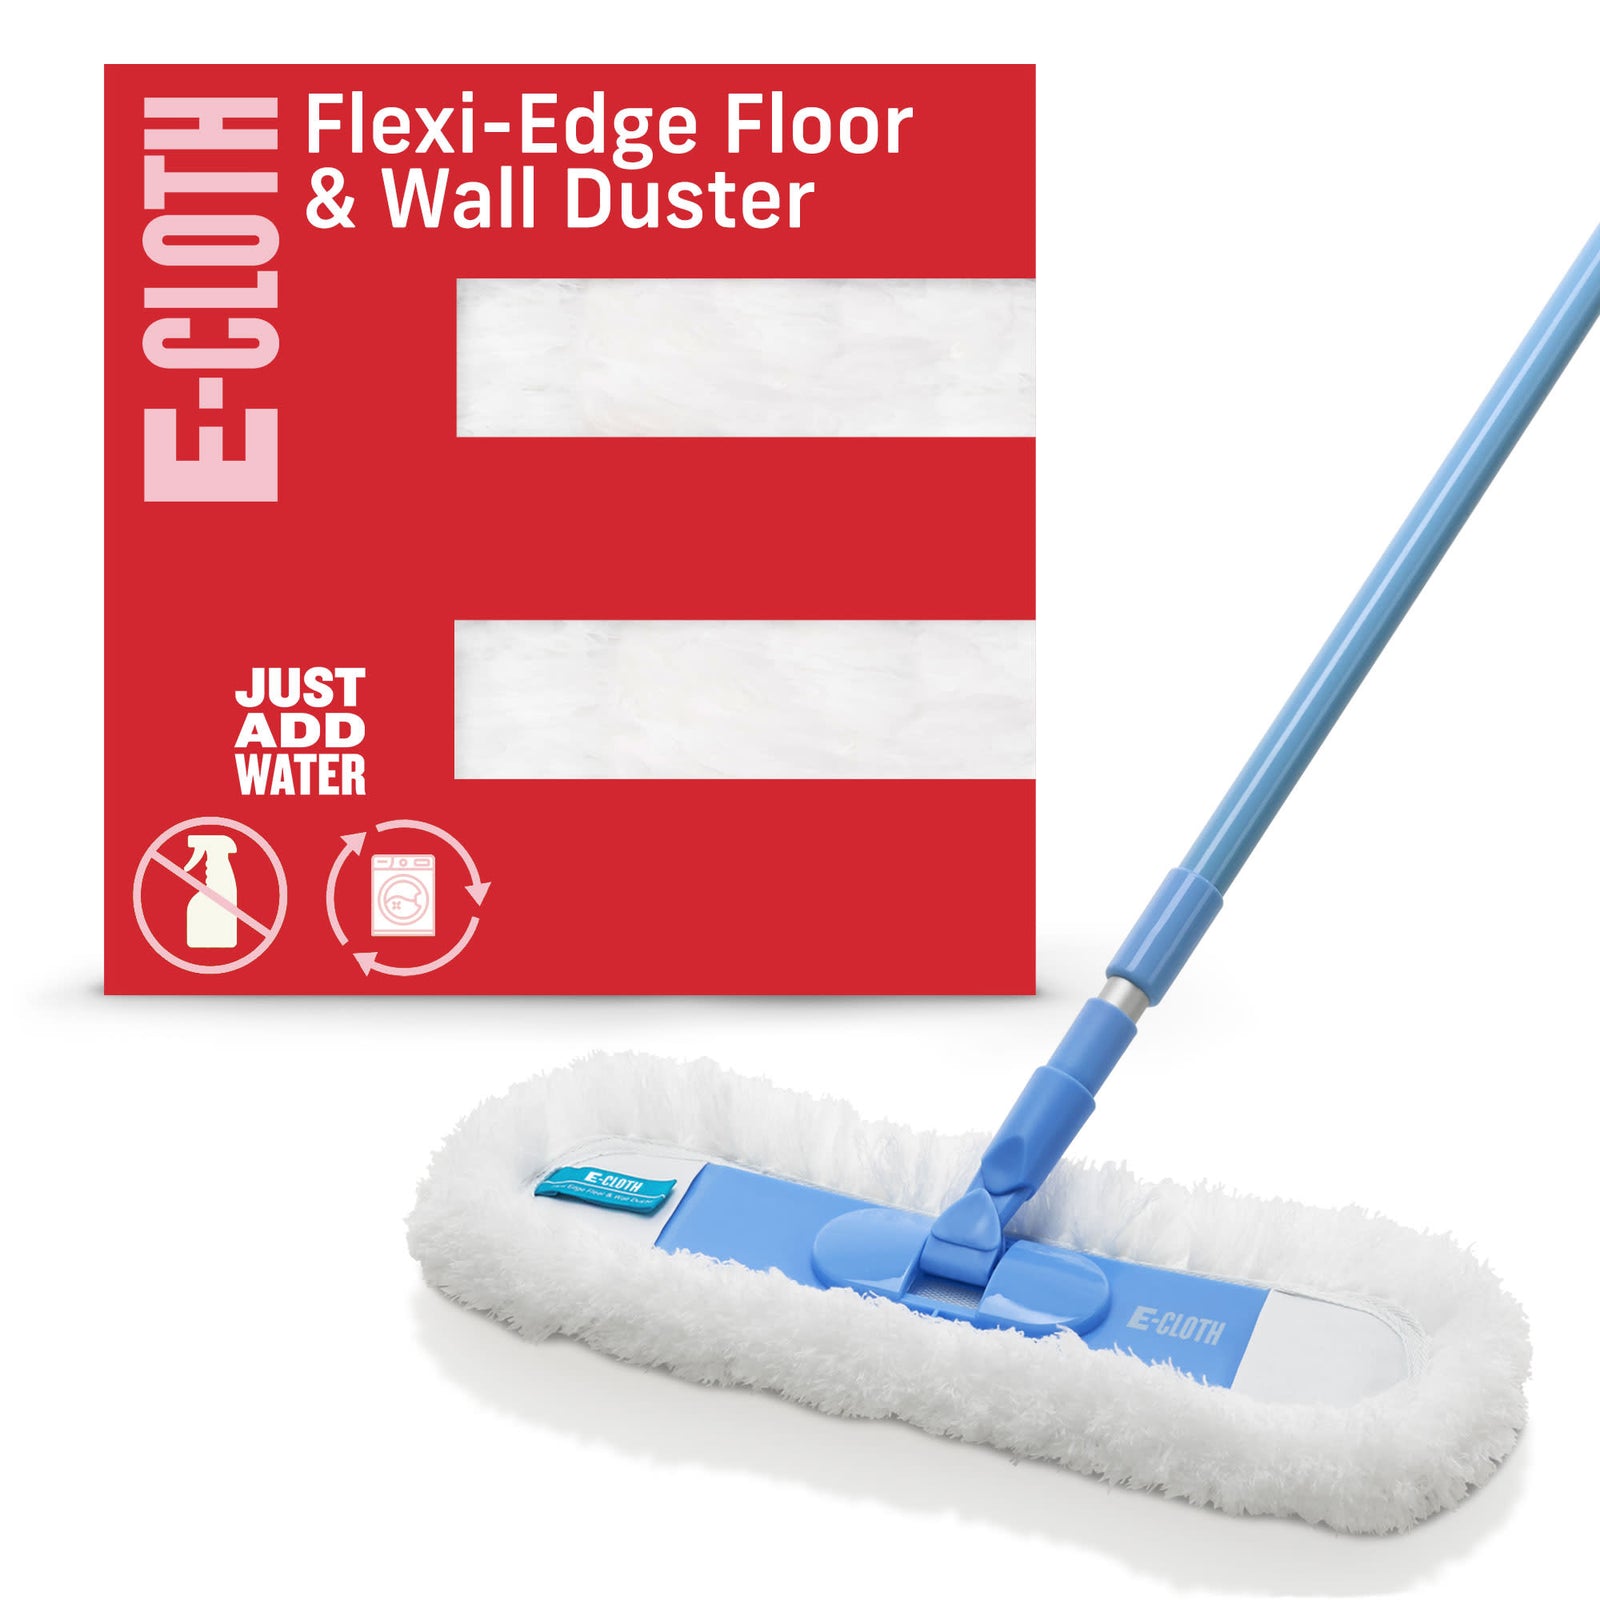 This Top-Selling Microfiber Mop Is on Sale at